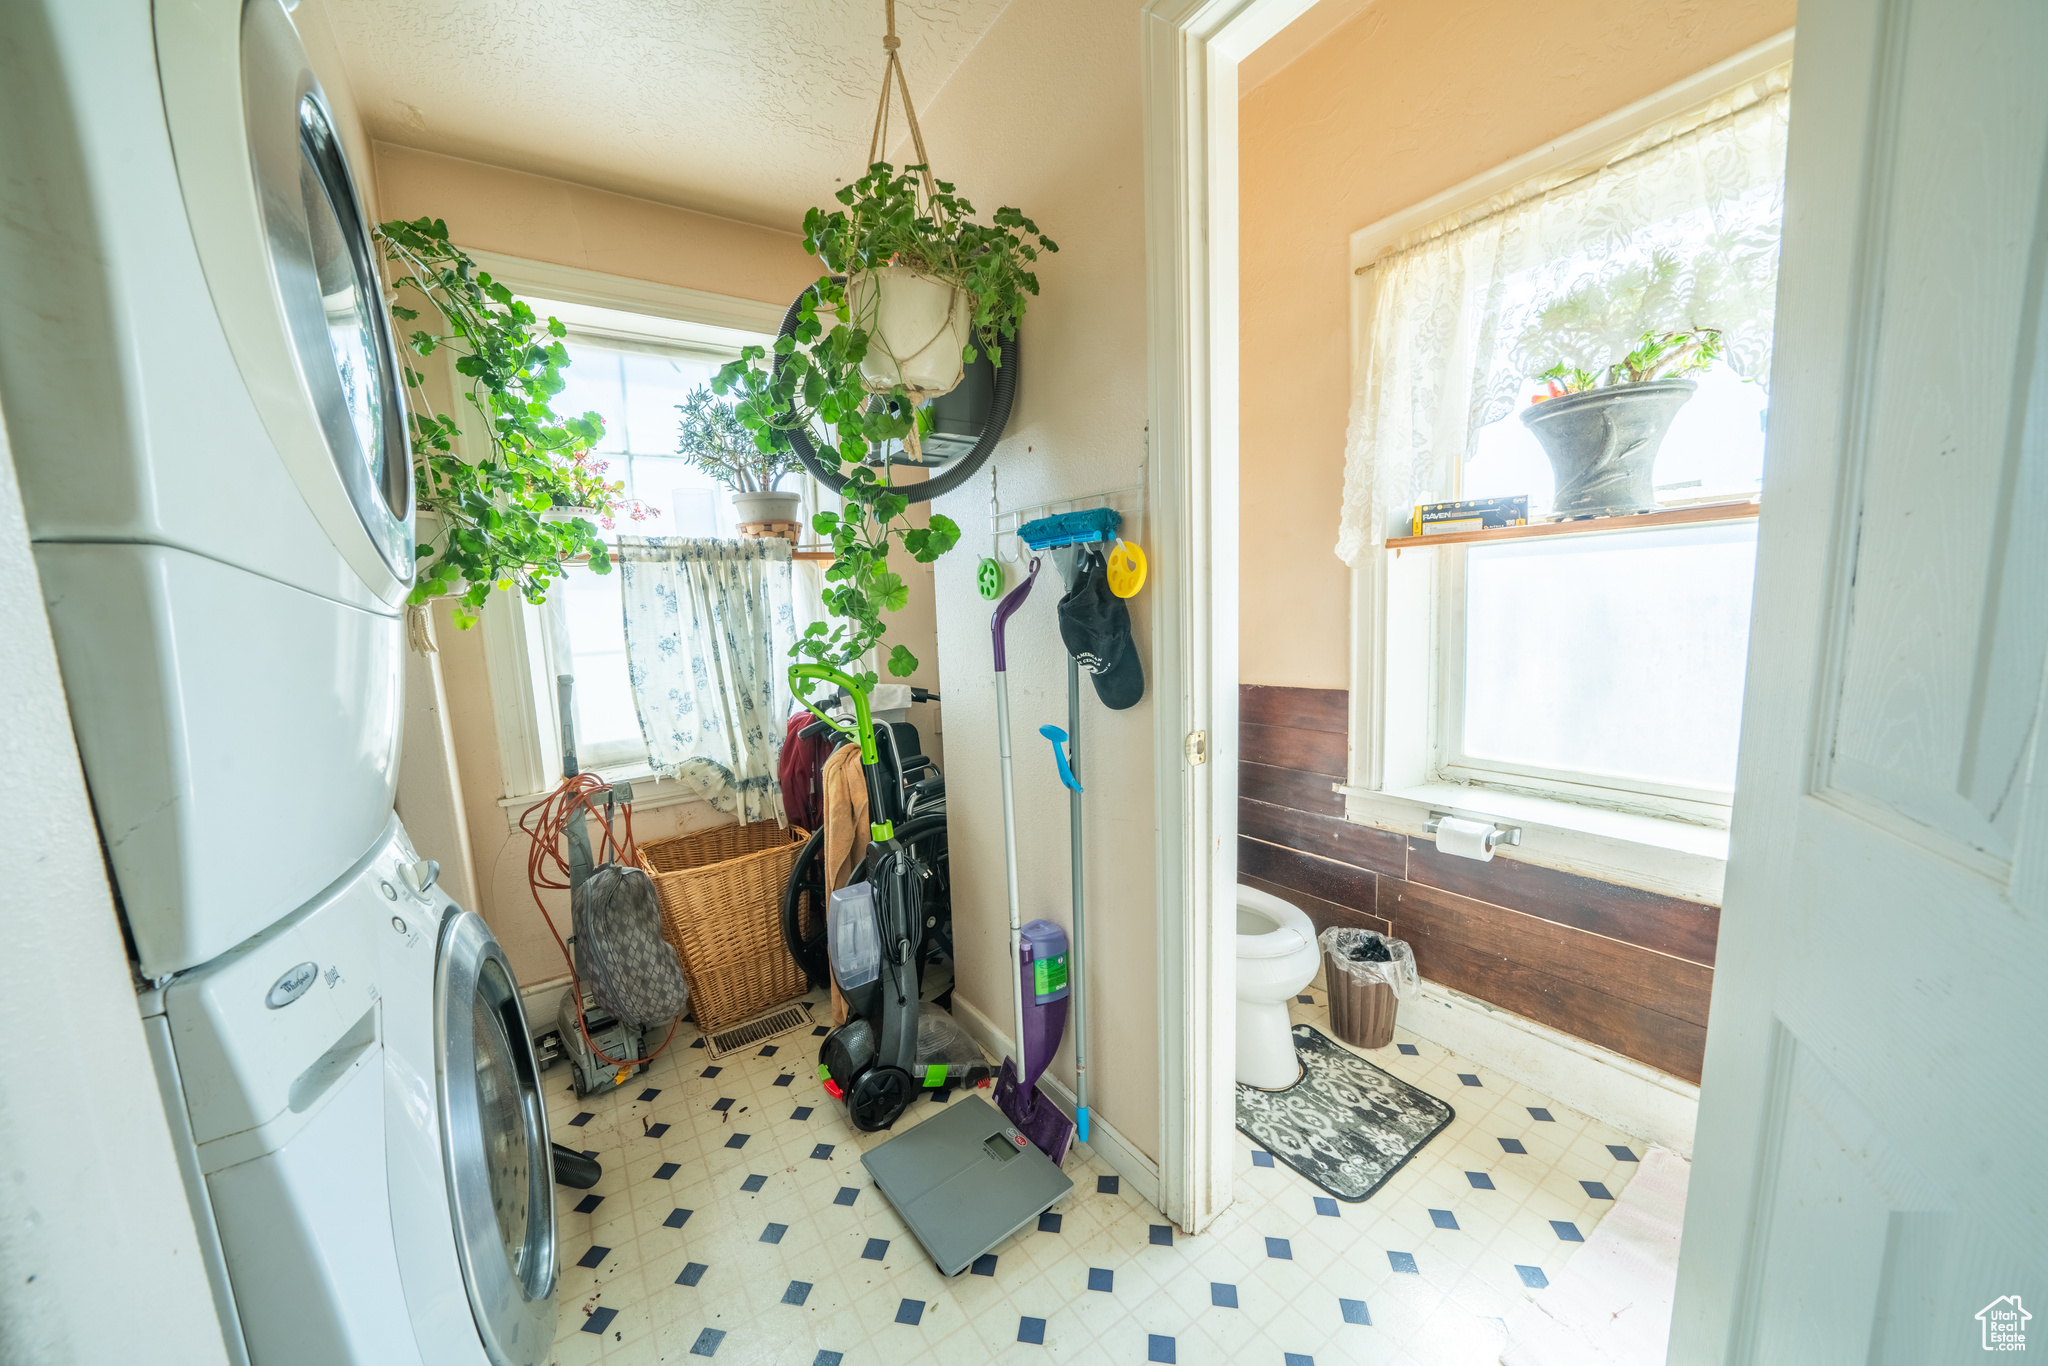 Laundry room, adjacent to half bathroom with a textured ceiling, toilet, tile flooring, and stacked washer / dryer